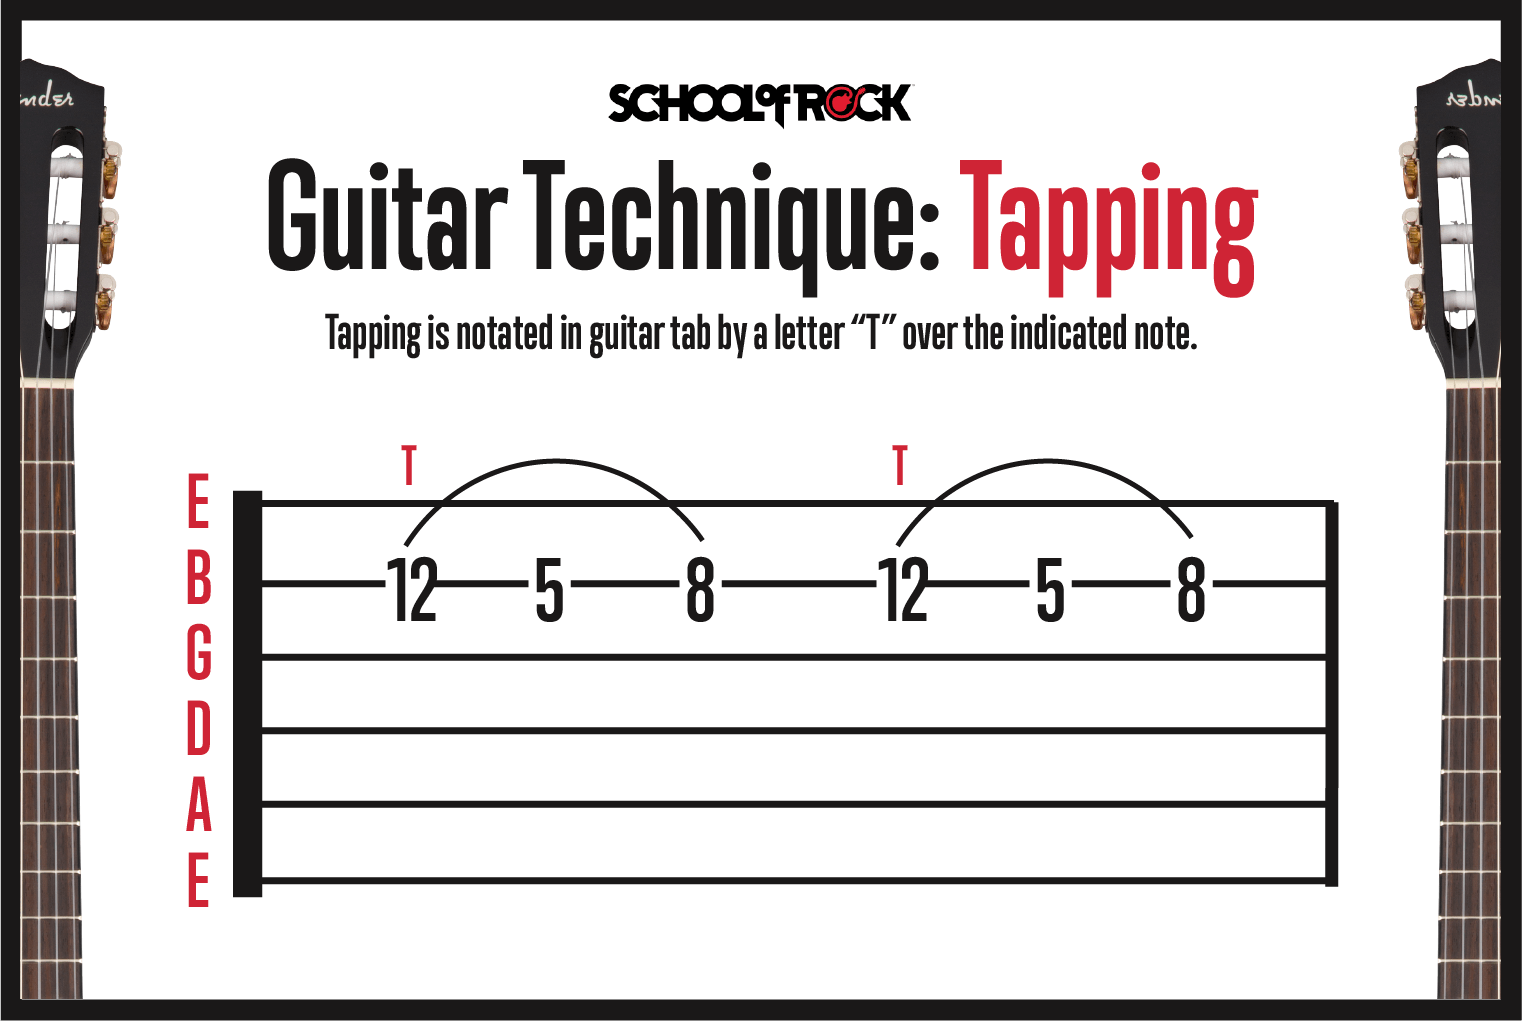 Guitar technique tapping notes